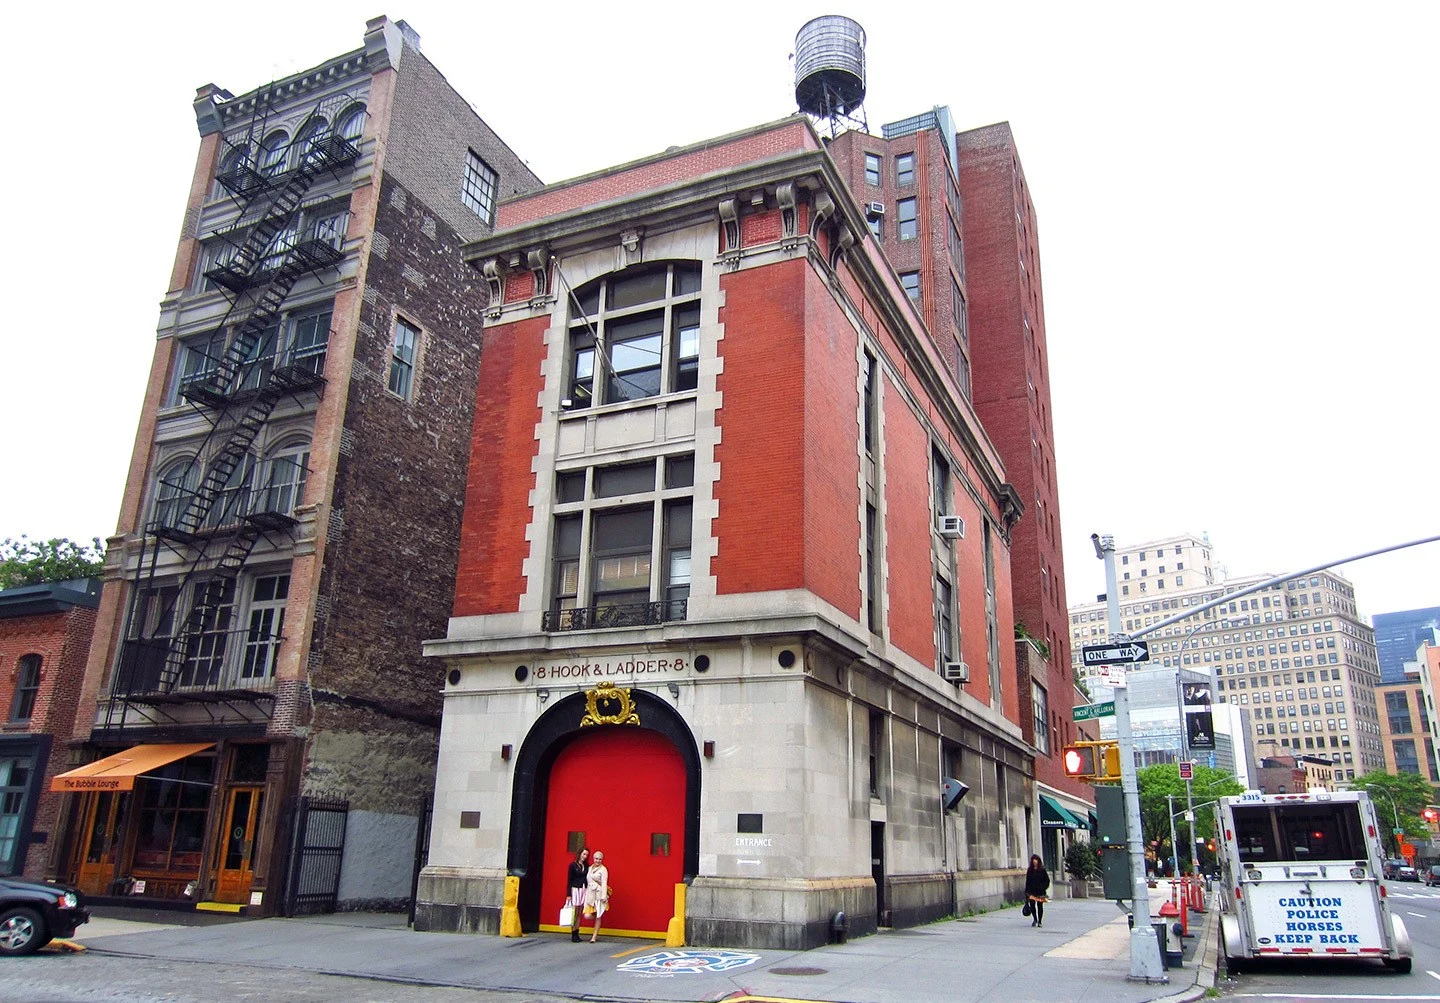 Hook and Ladder 8, the Ghostbusters fire station in New York